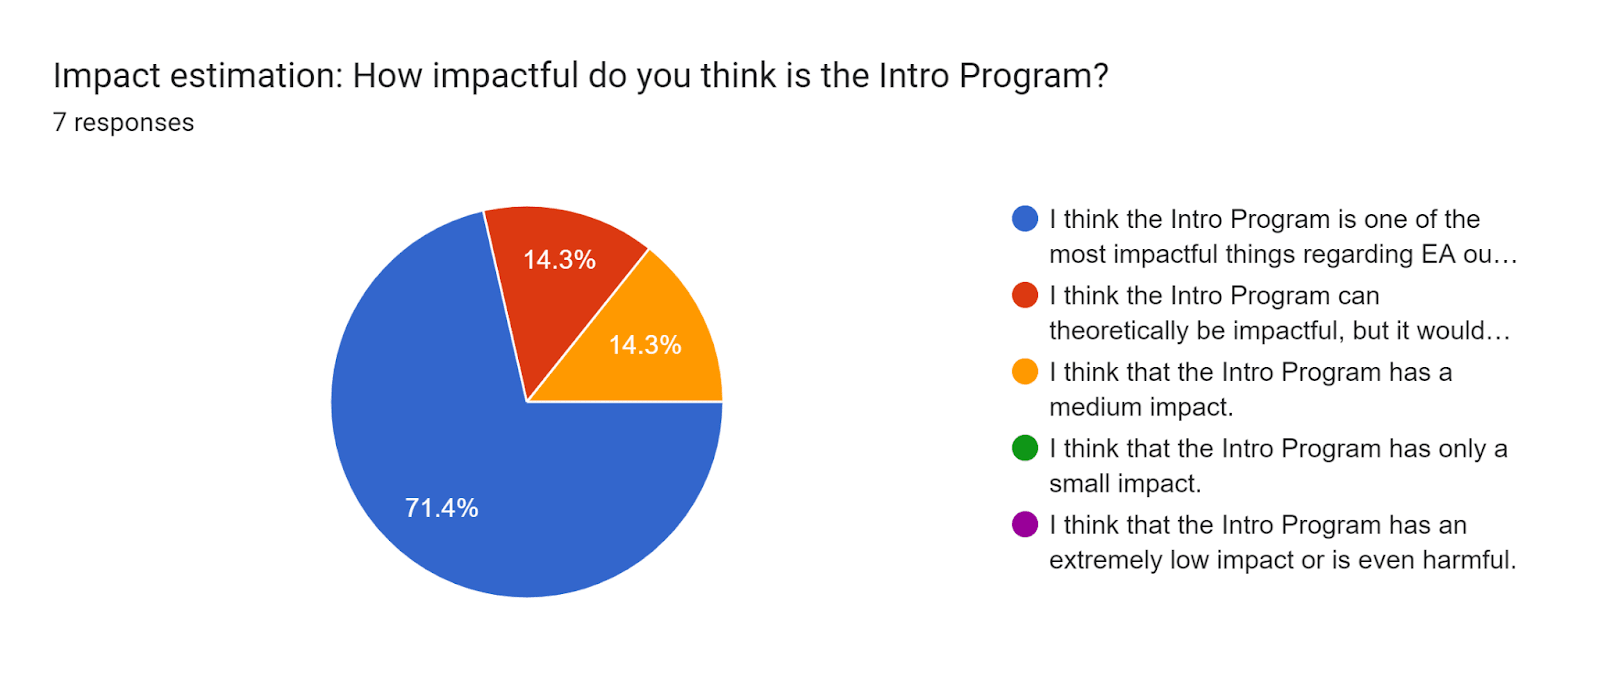 Forms response chart. Question title: Impact estimation: How impactful do you think is the Intro Program?. Number of responses: 7 responses.